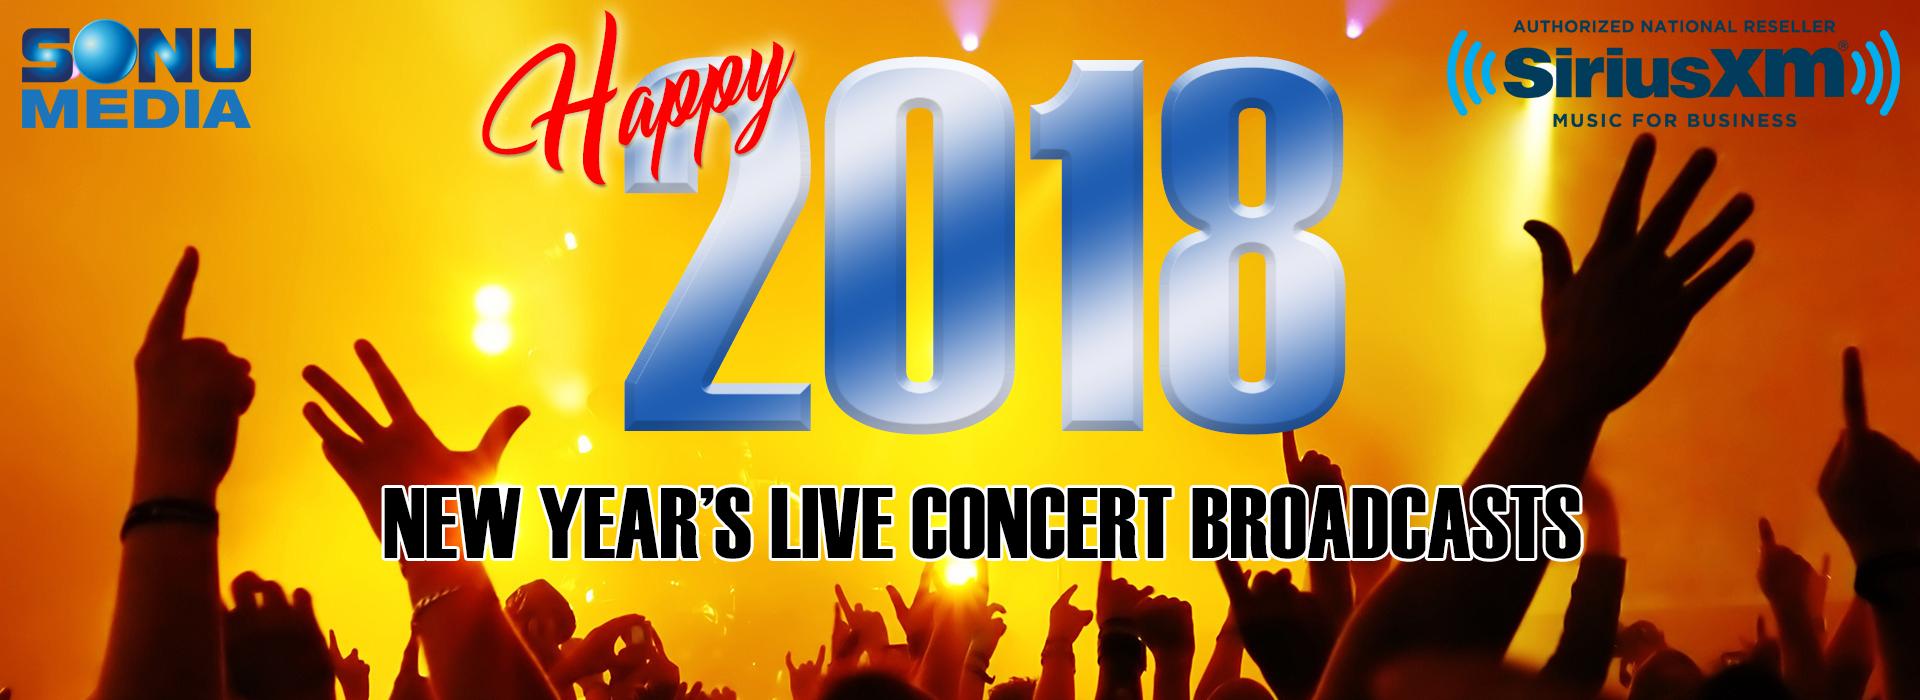 SiriusXM Music for Business New Years Eve Live Concerts